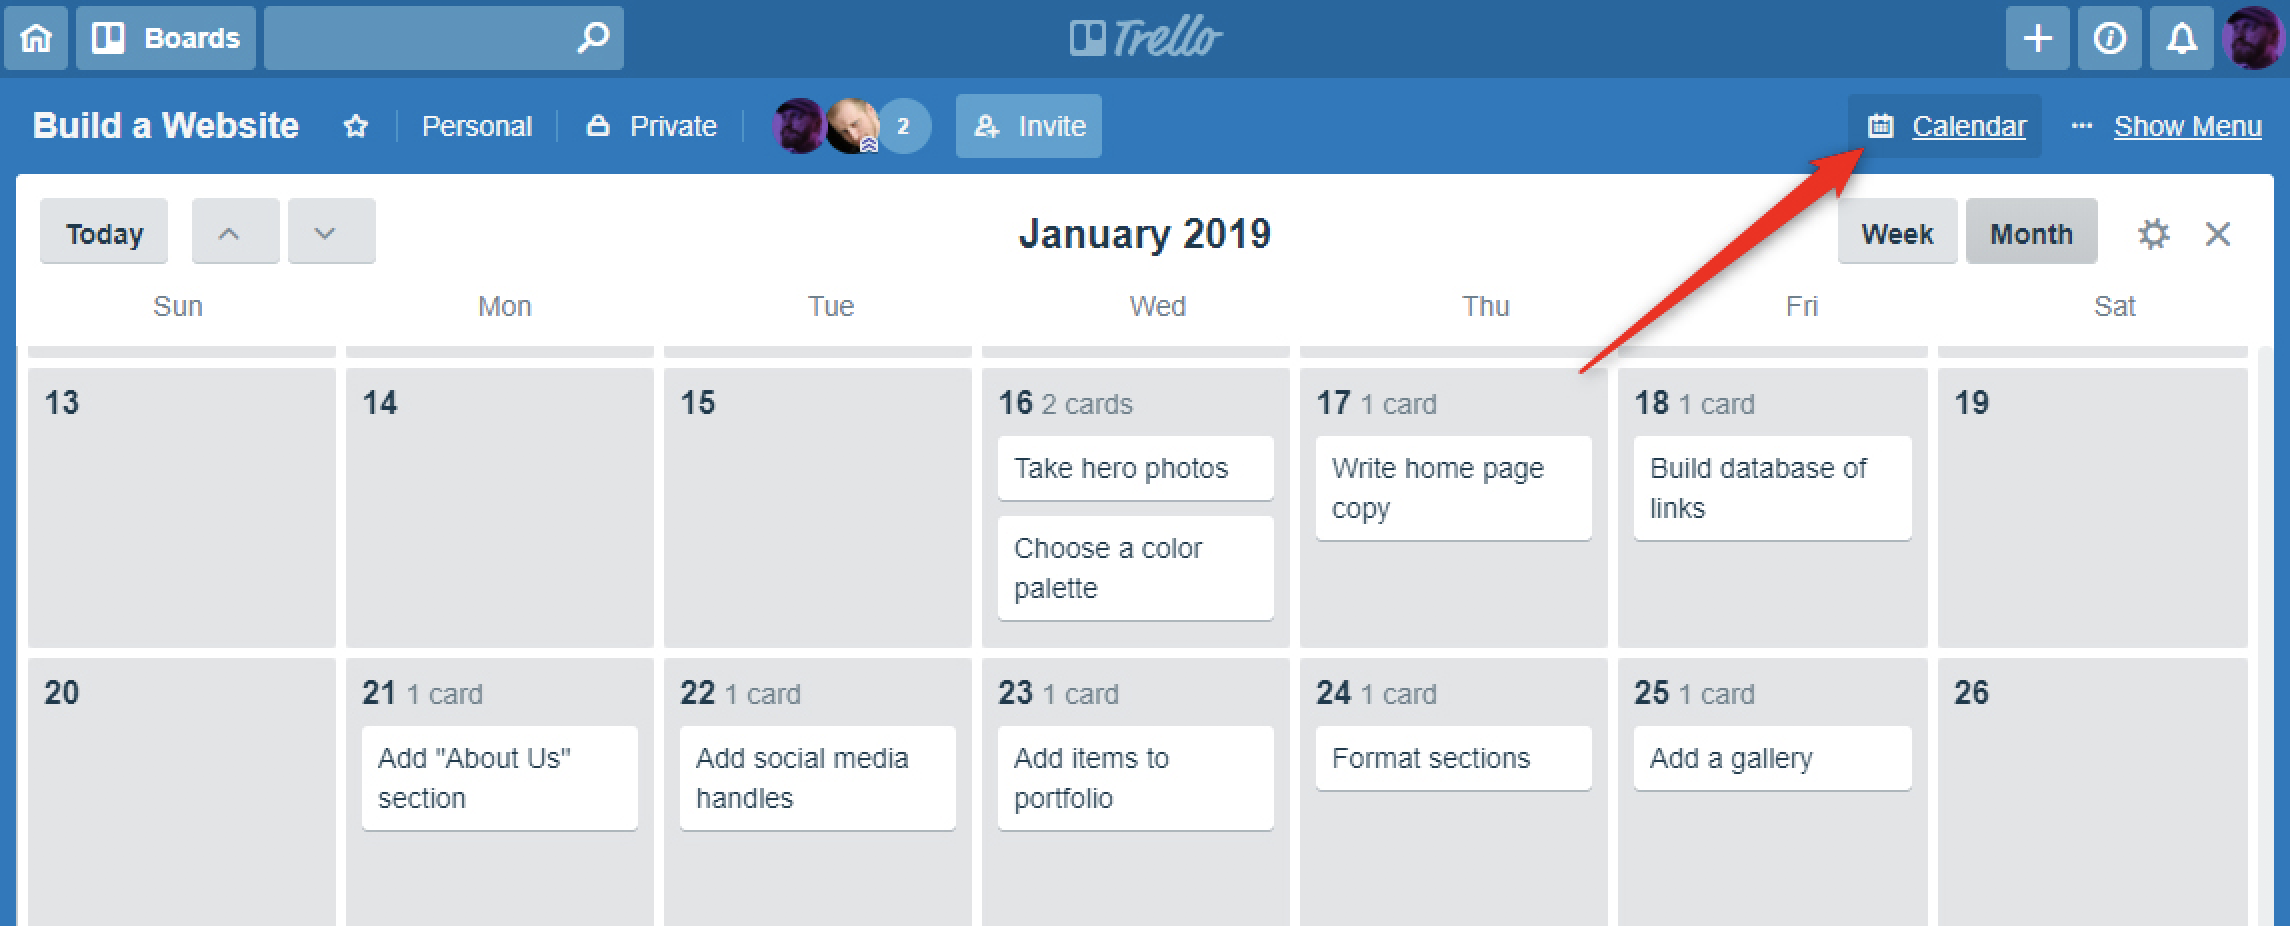 The Ultimate Guide to Trello For Freelancers